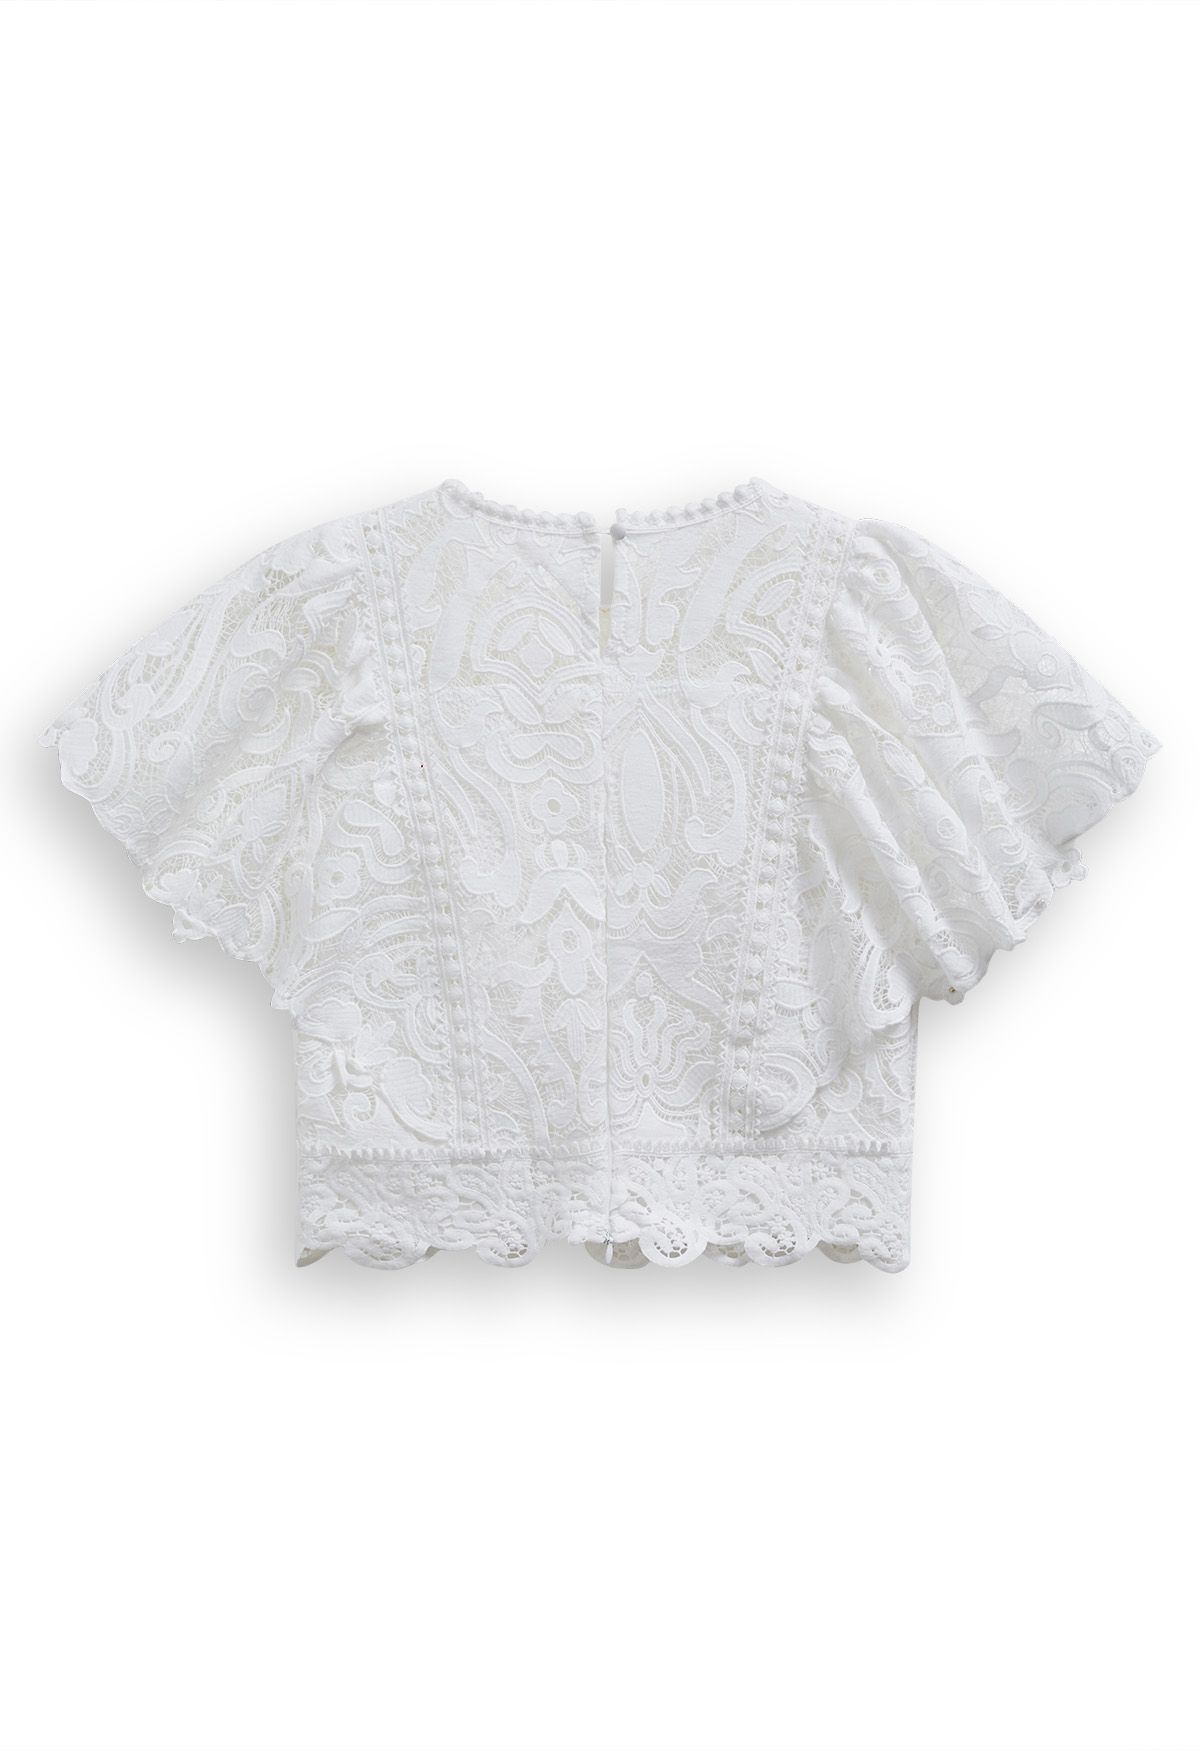 Delicate Cutie Cutwork Lace Flutter Sleeves Top in White